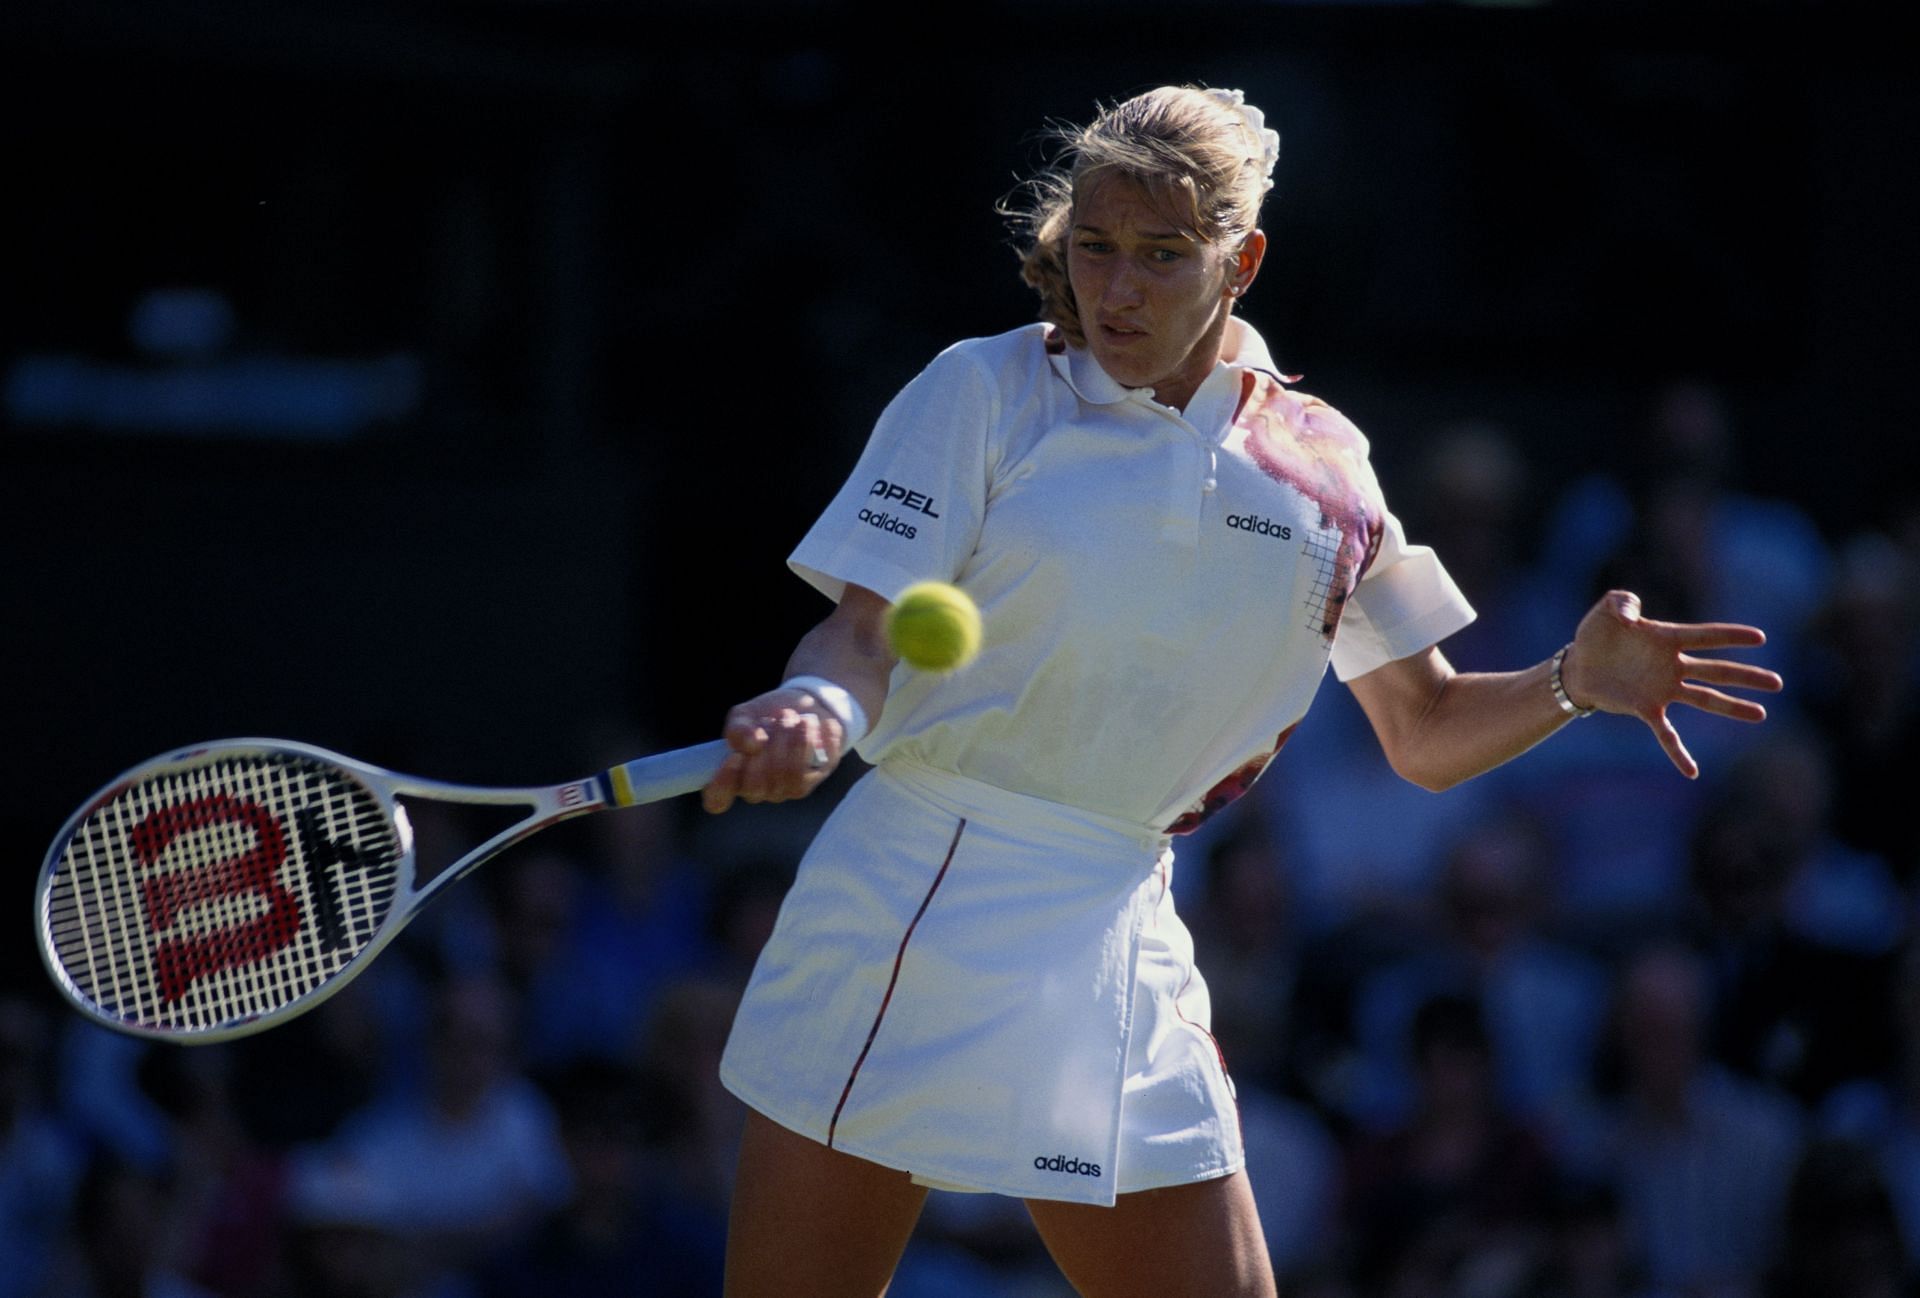 Steffi Graf in action at the Wimbledon Lawn Tennis Championship.